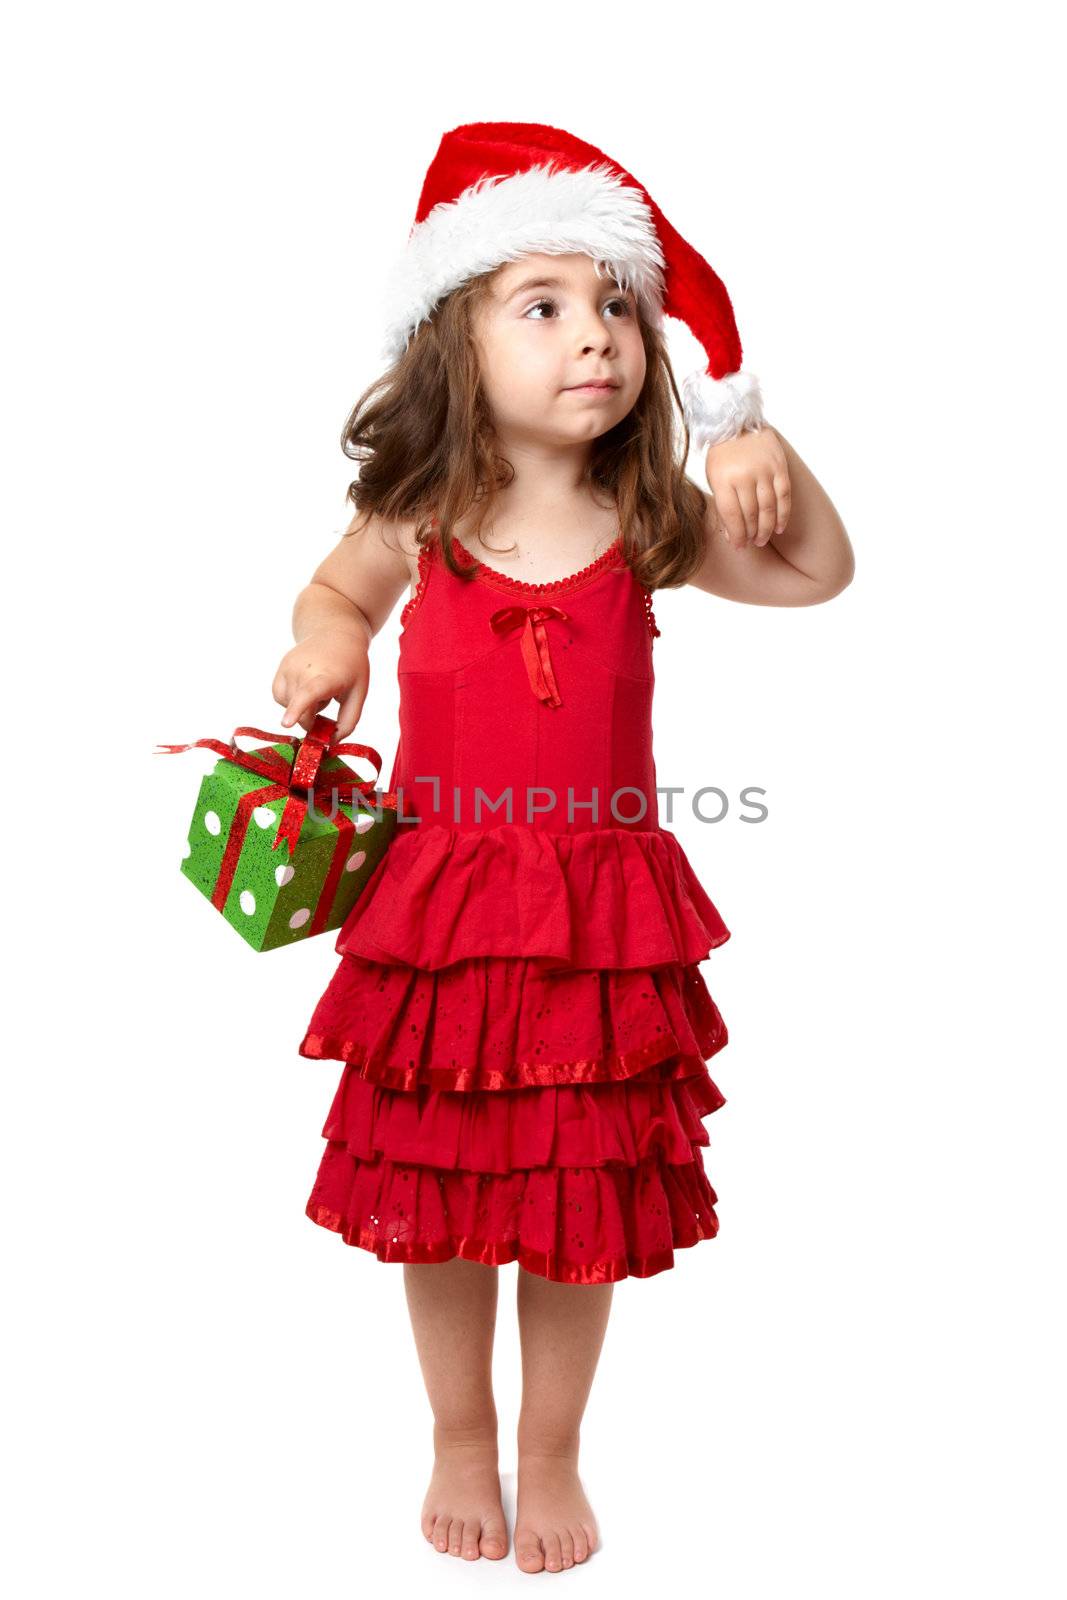 Little girl with Christmas present by lovleah